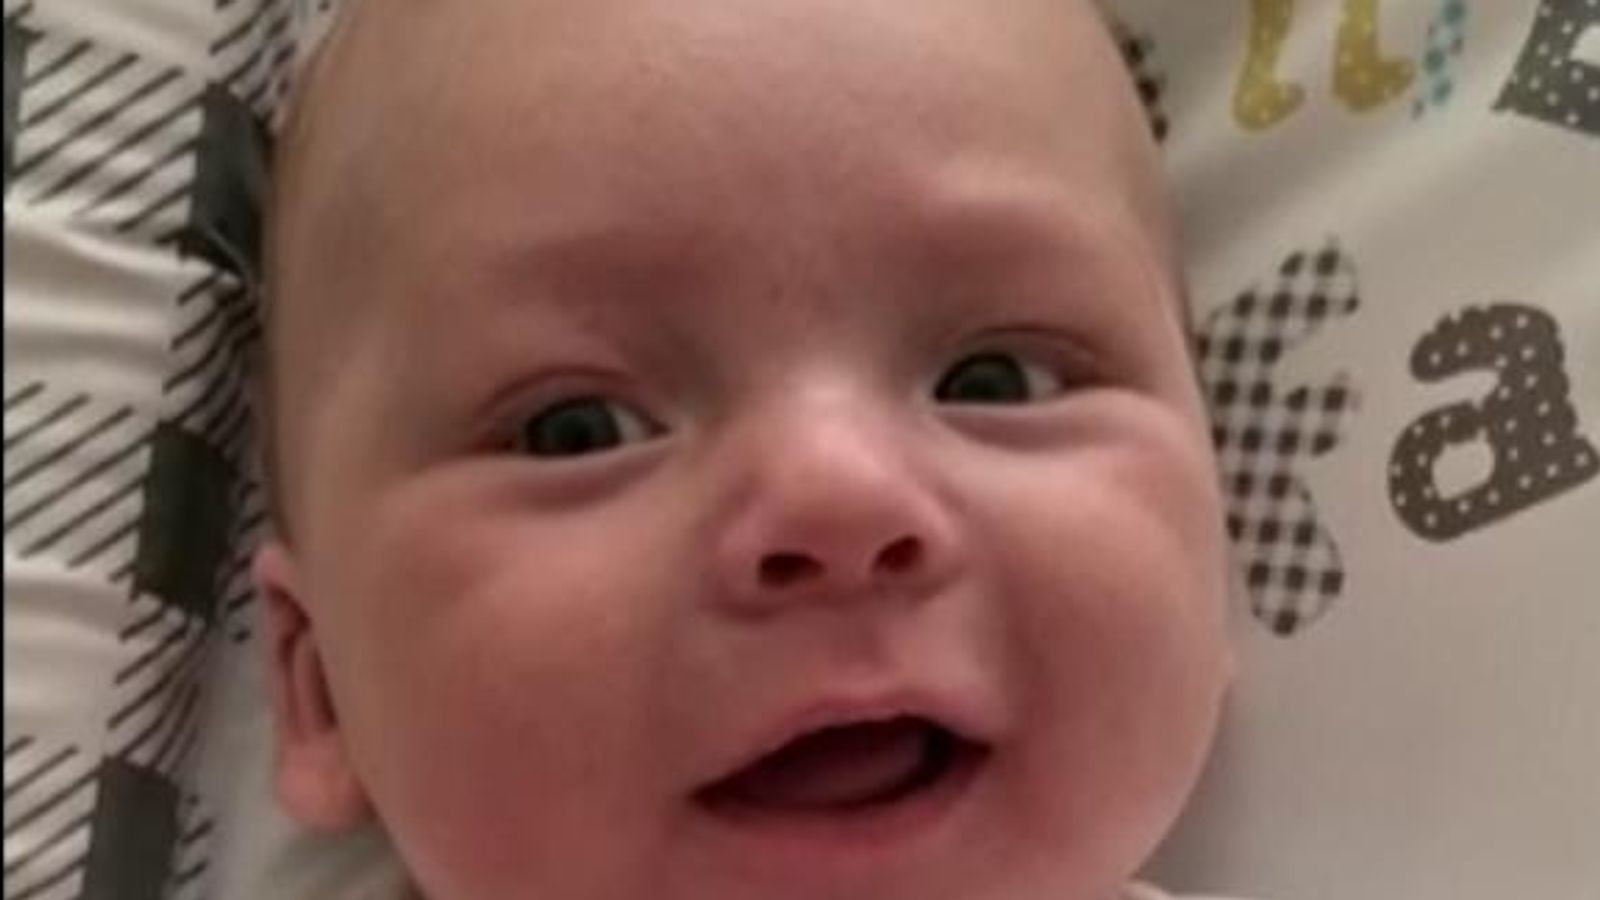 Stepfather and mother jailed over death of baby Jacob Crouch after 10-month-old suffered 'car crash-like' injuries